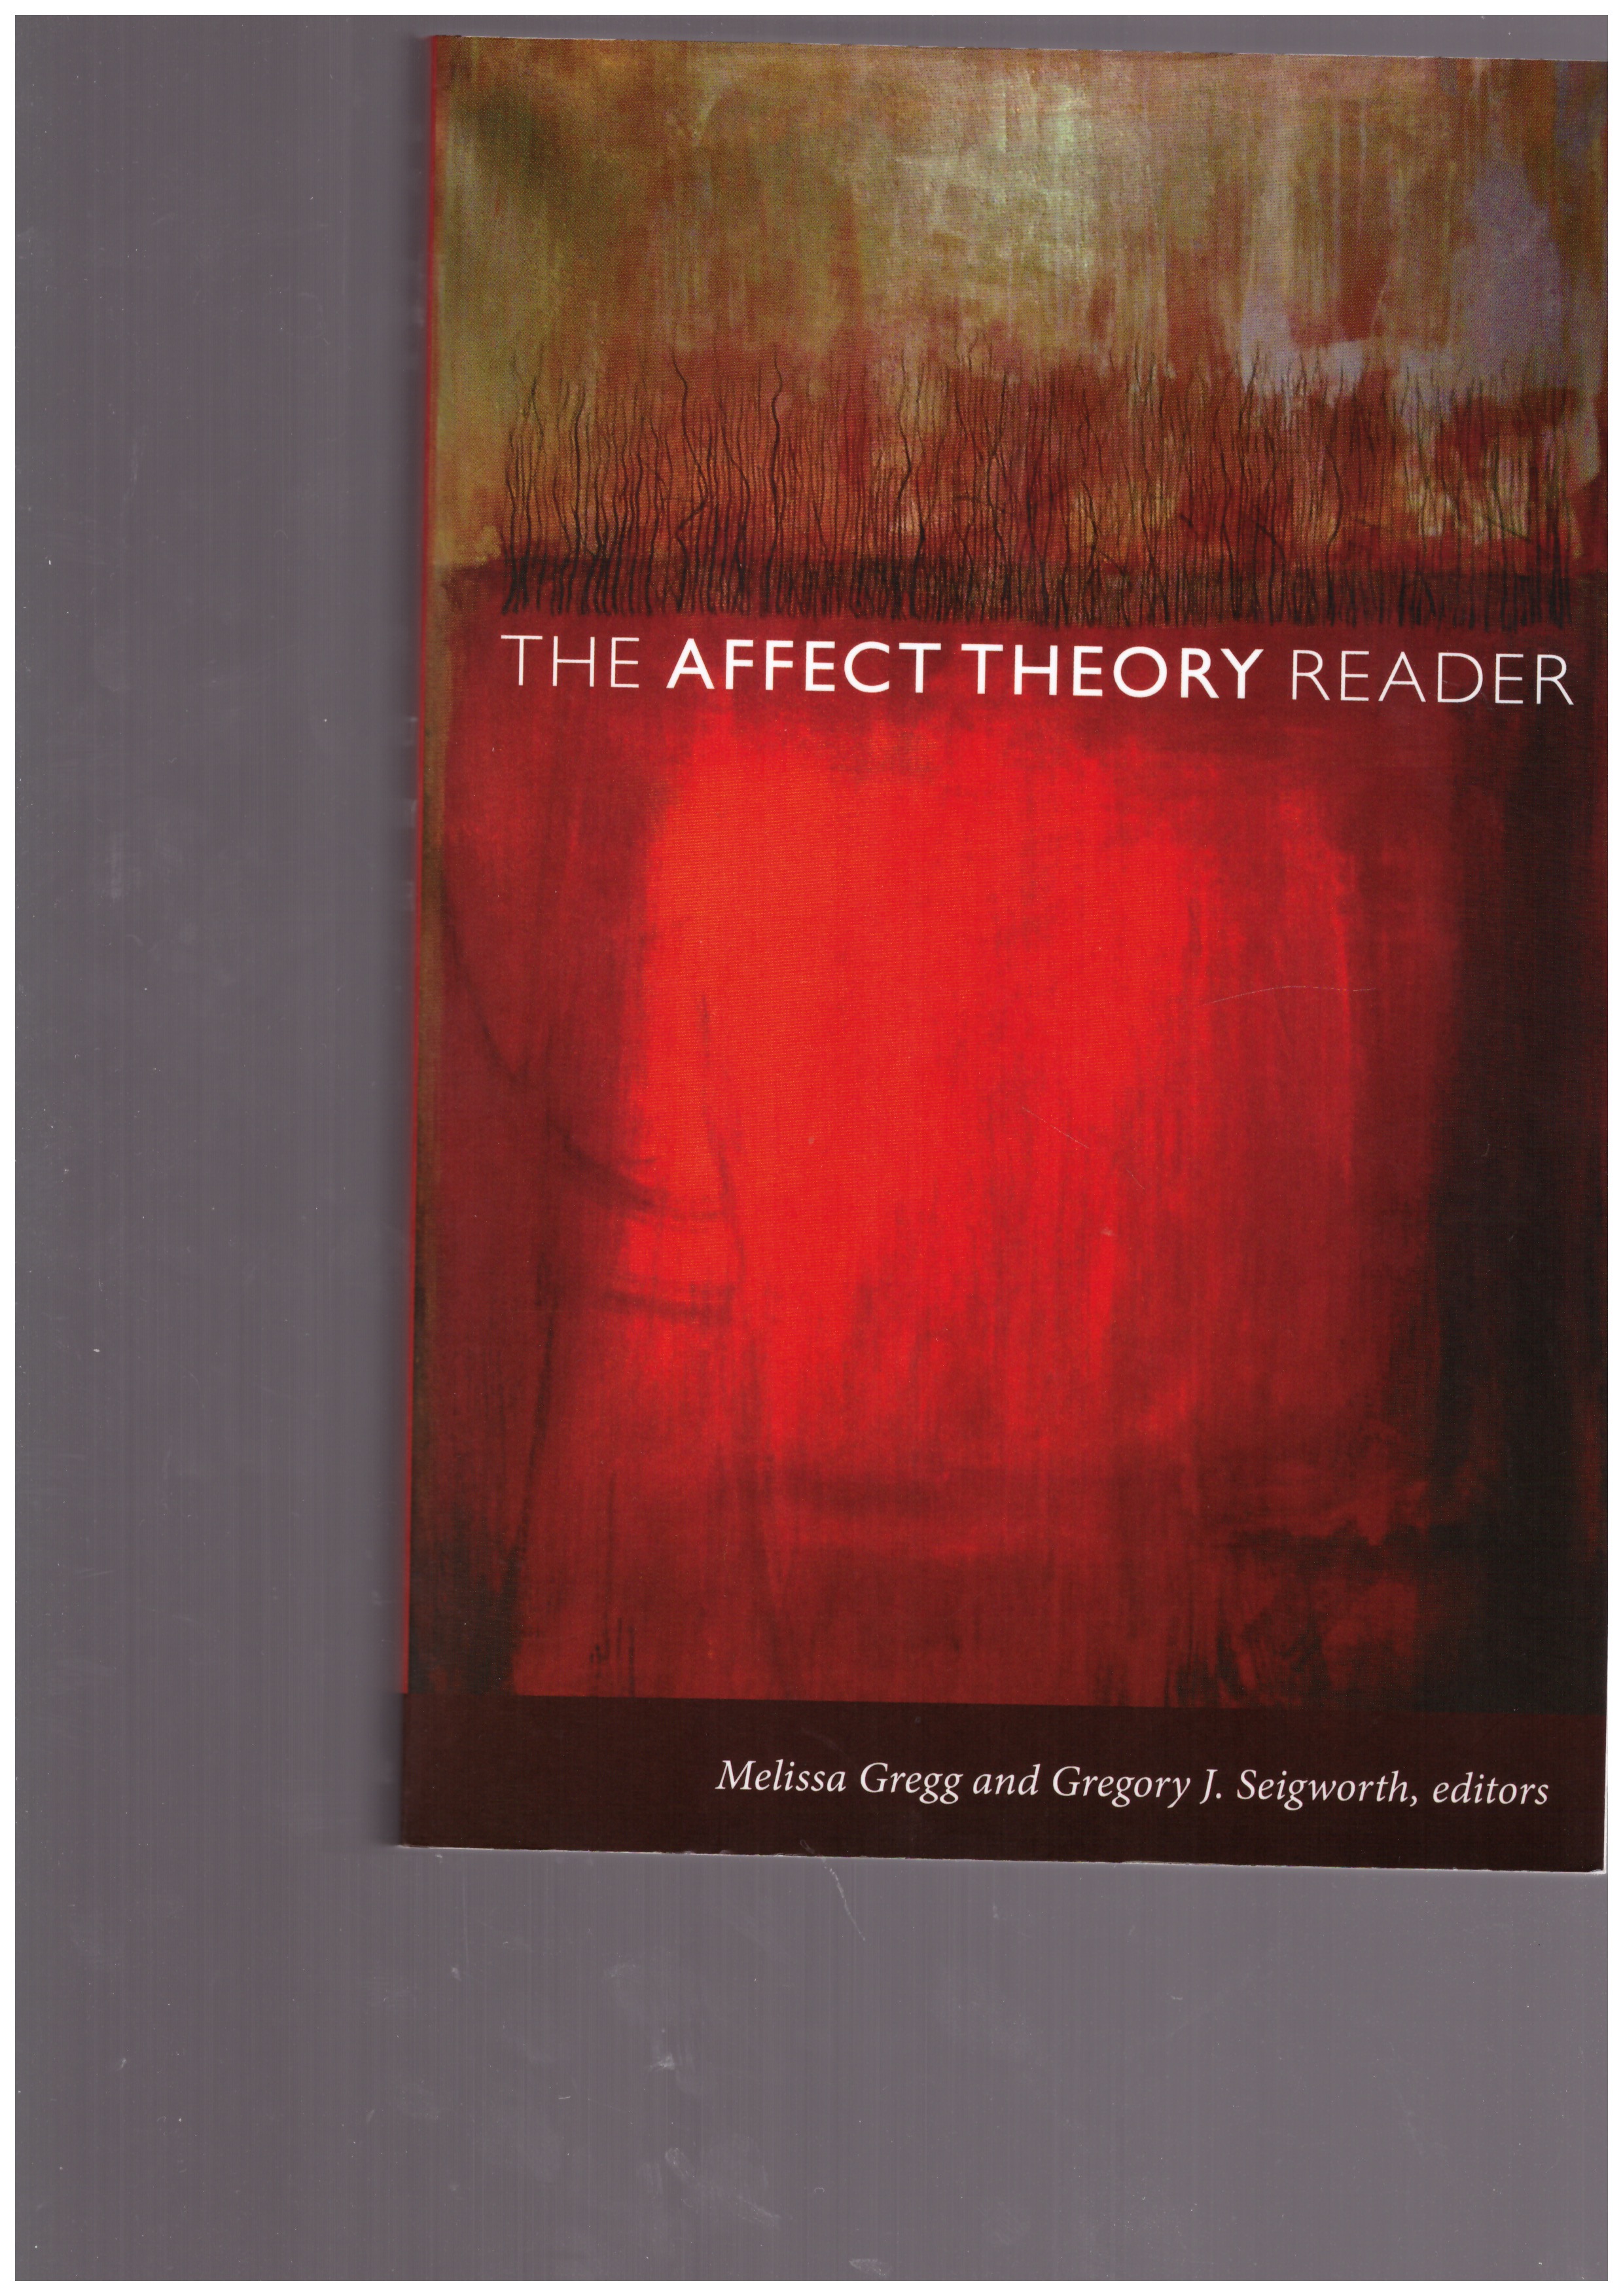 GREGG, Melissa; SEIGWORTH, Gregory J. (ed.) - The Affect Theory Reader